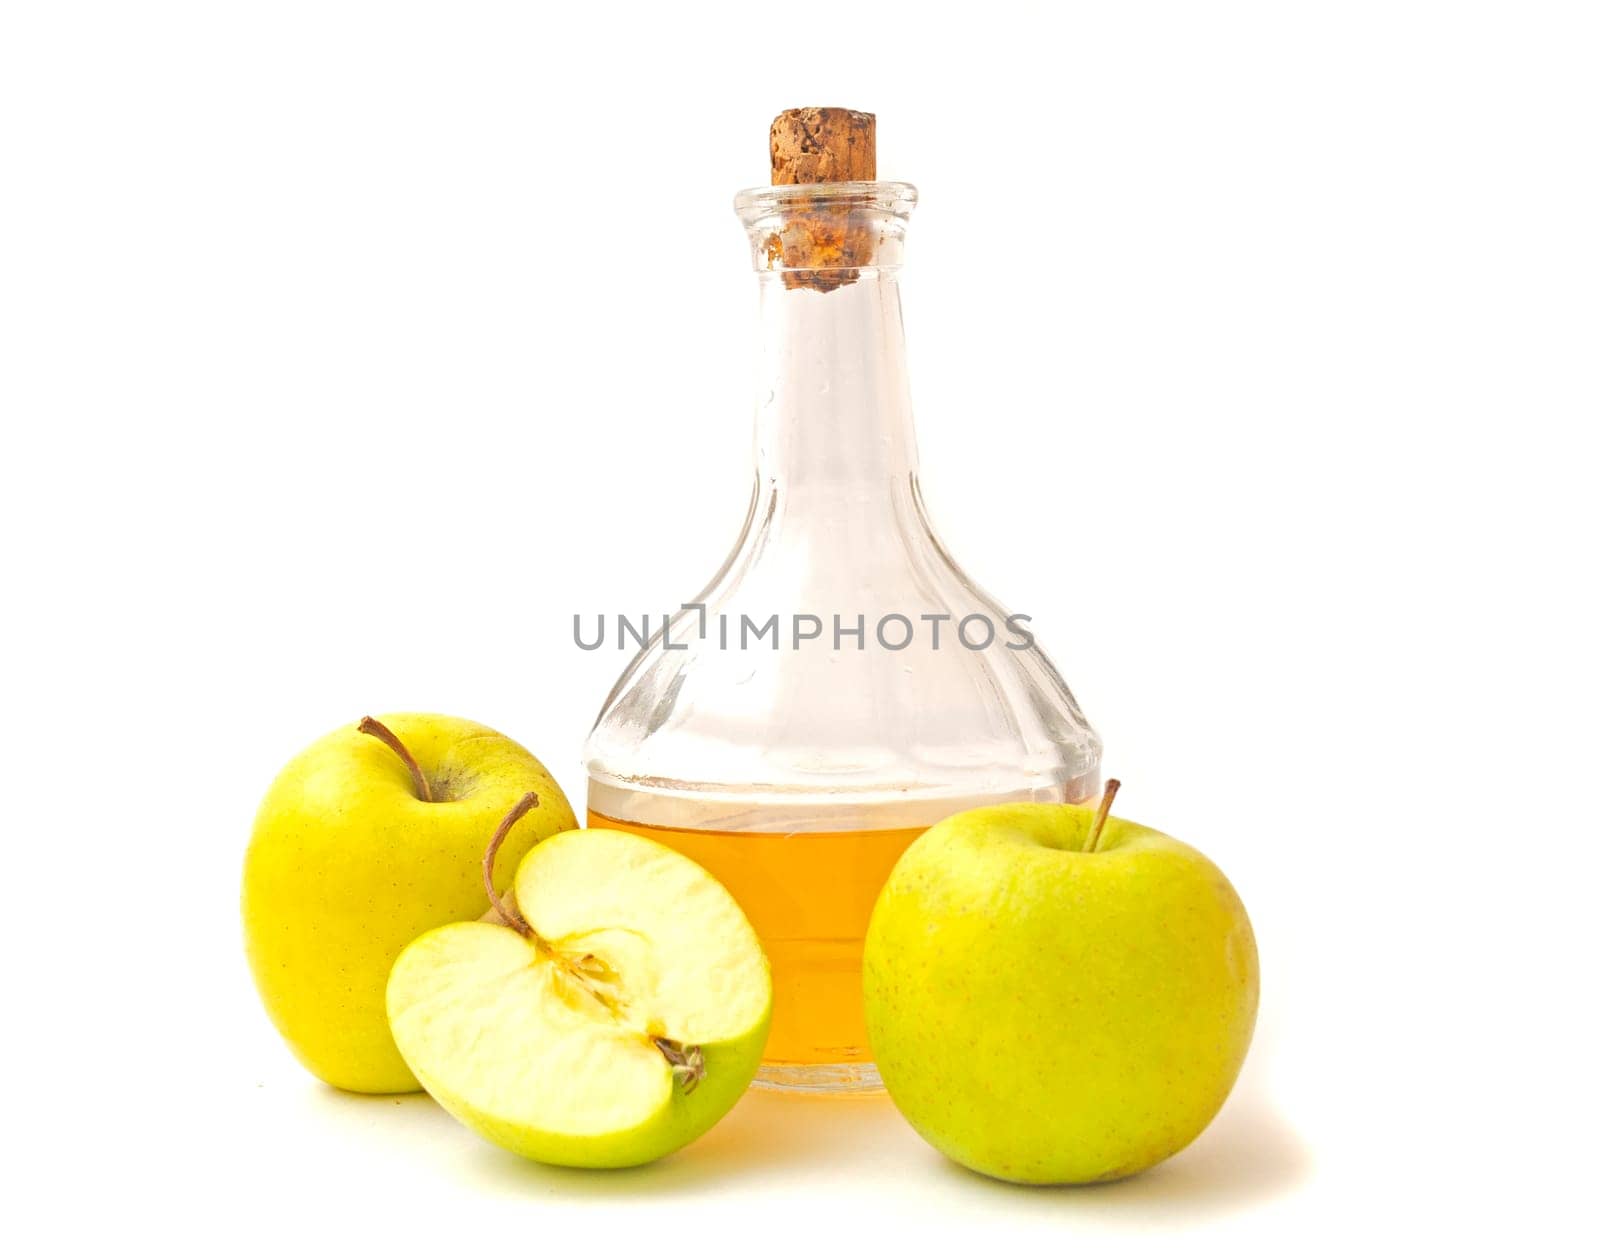 A decanter with apple cider vinegar, two and half apples isolated on white background. by andre_dechapelle